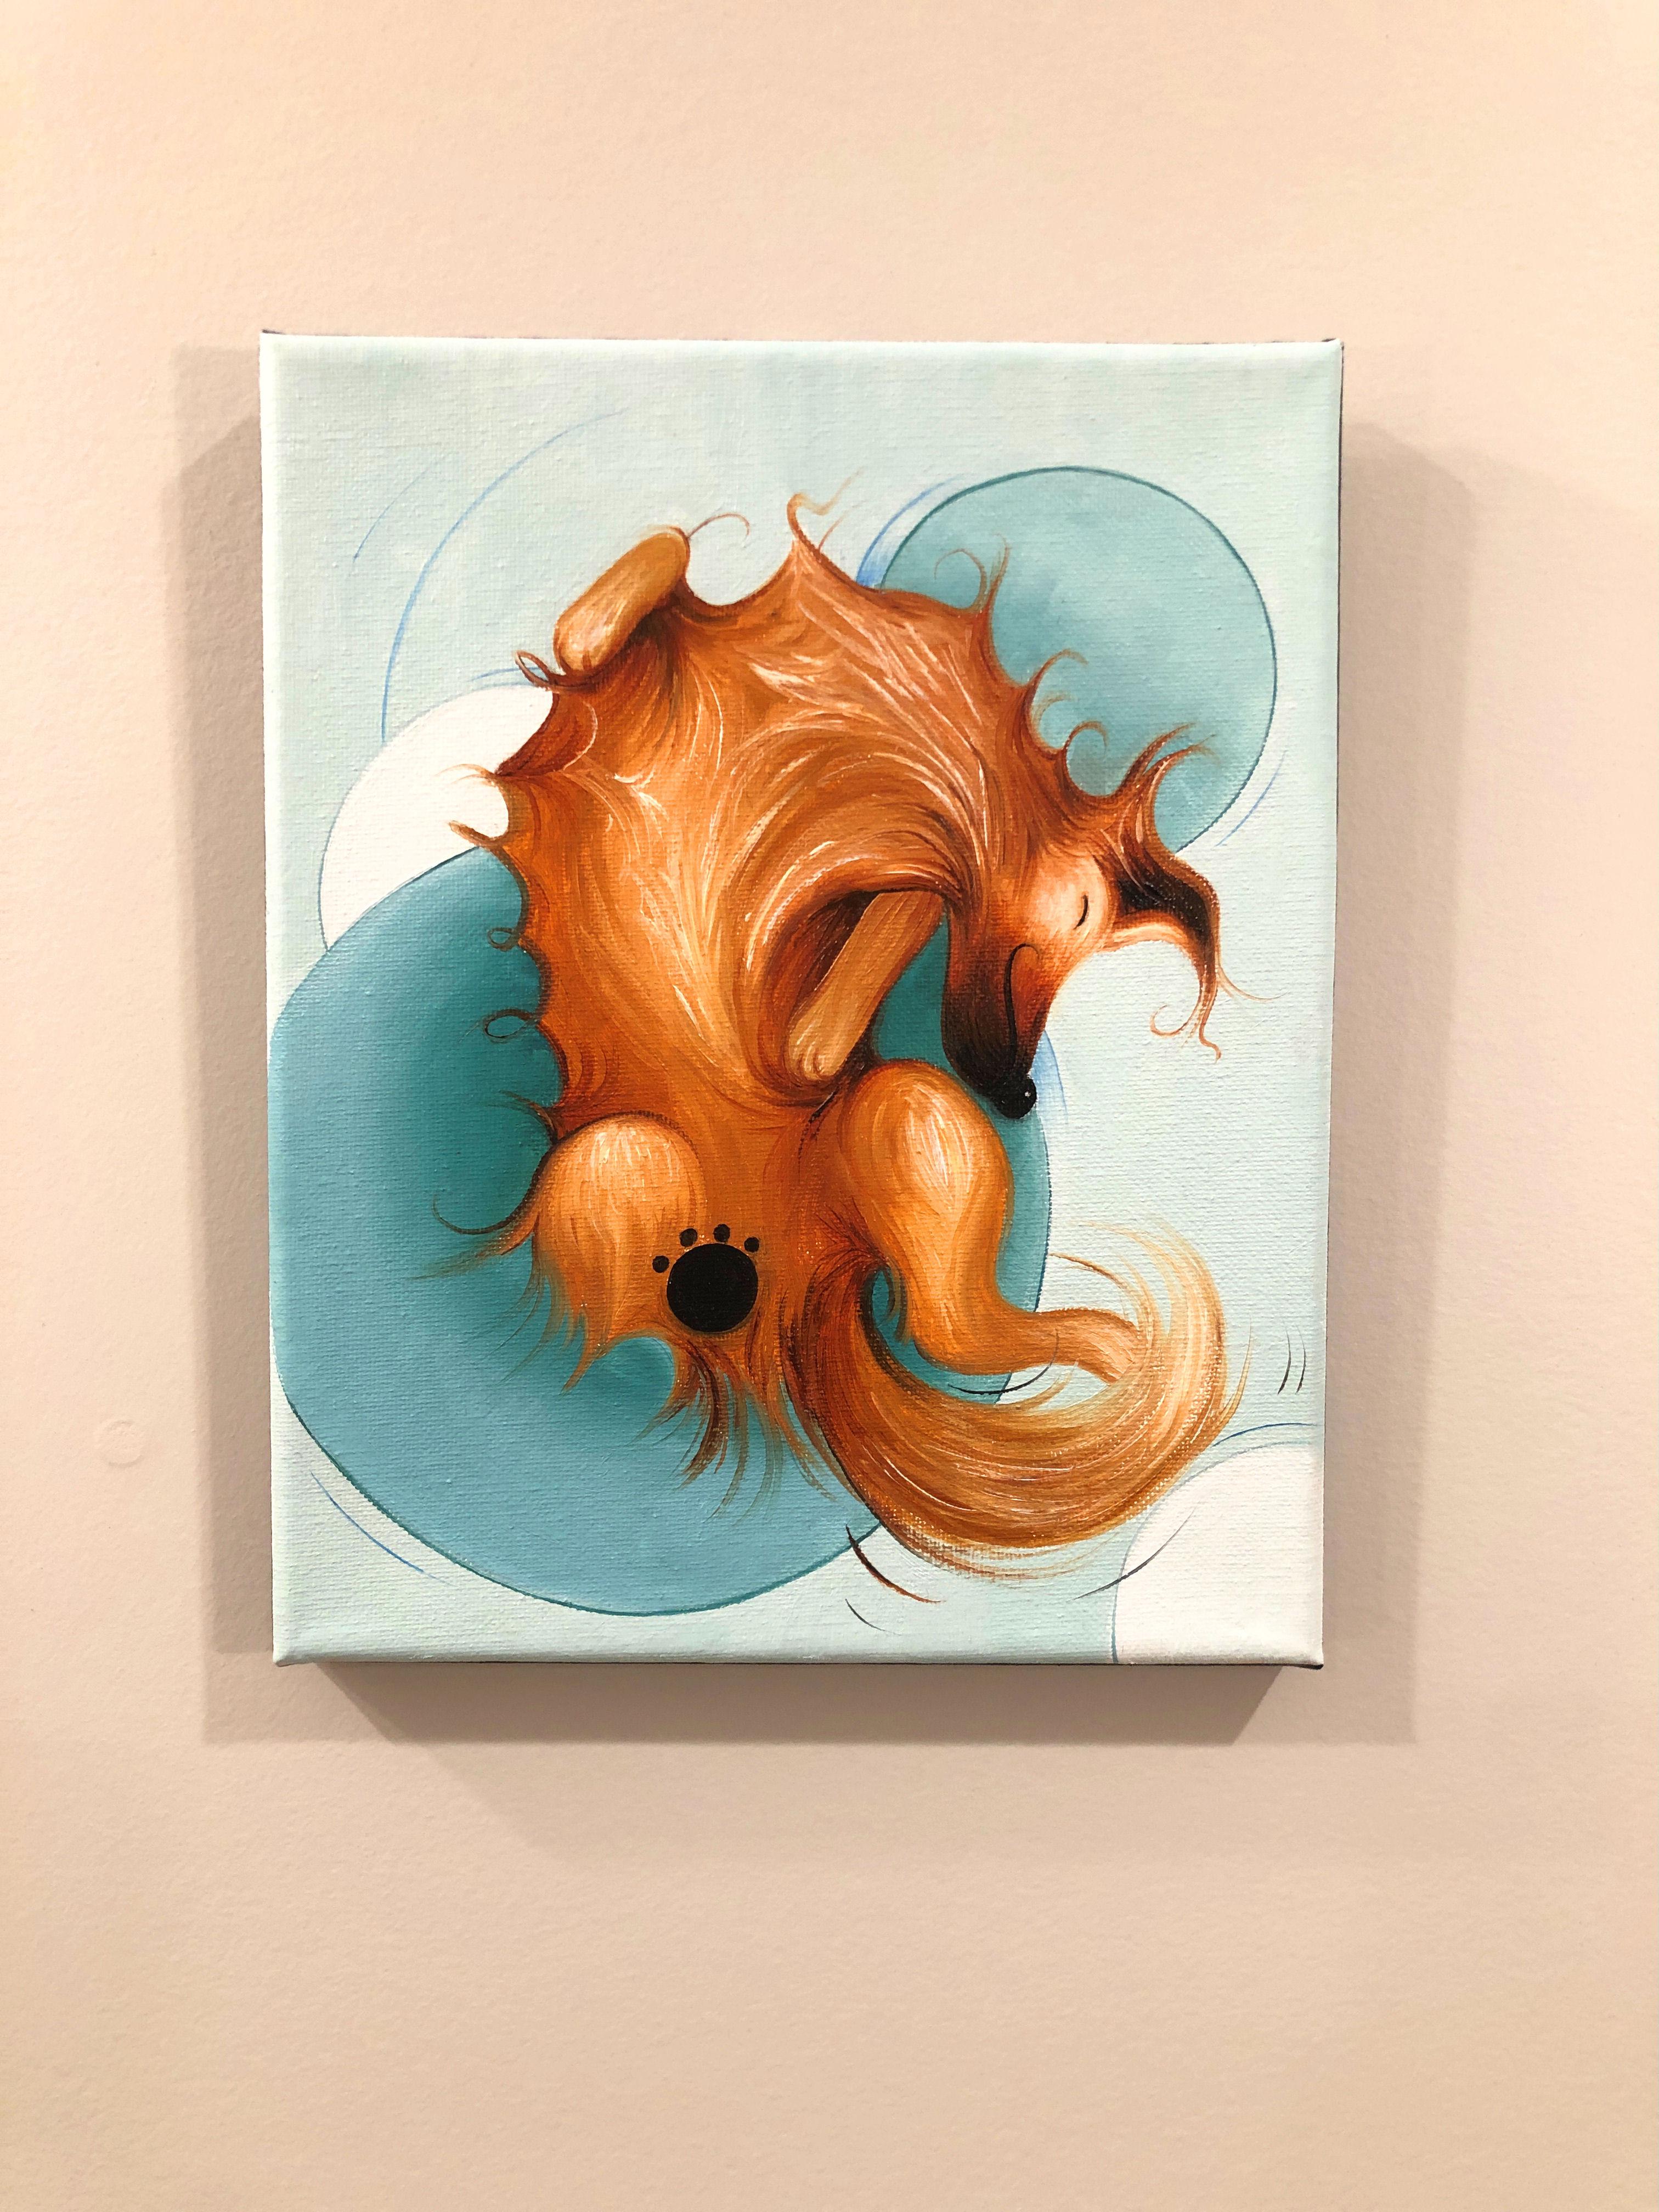 <p>Artist Comments<br>A fun little painting that captures Sumner's rescue dog and faithful studio assistant, Hiccup, the dachshund mix. Surrounded by bubbles of blue and seafoam green, Hiccup takes a break from his studio assistant duties to snag